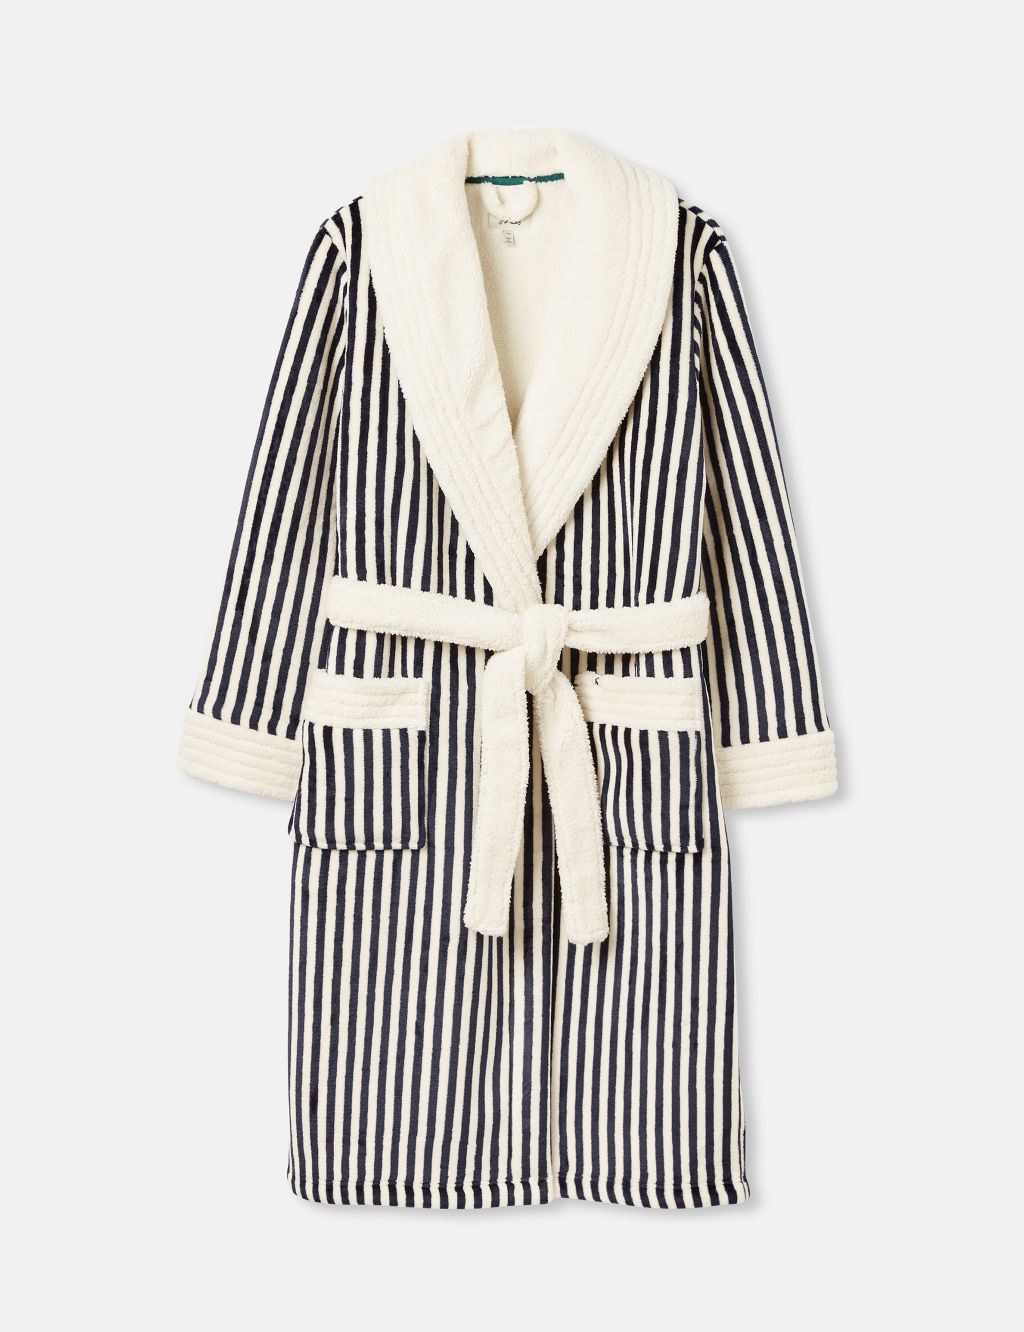 Cotton Modal Striped Dressing Gown image 2